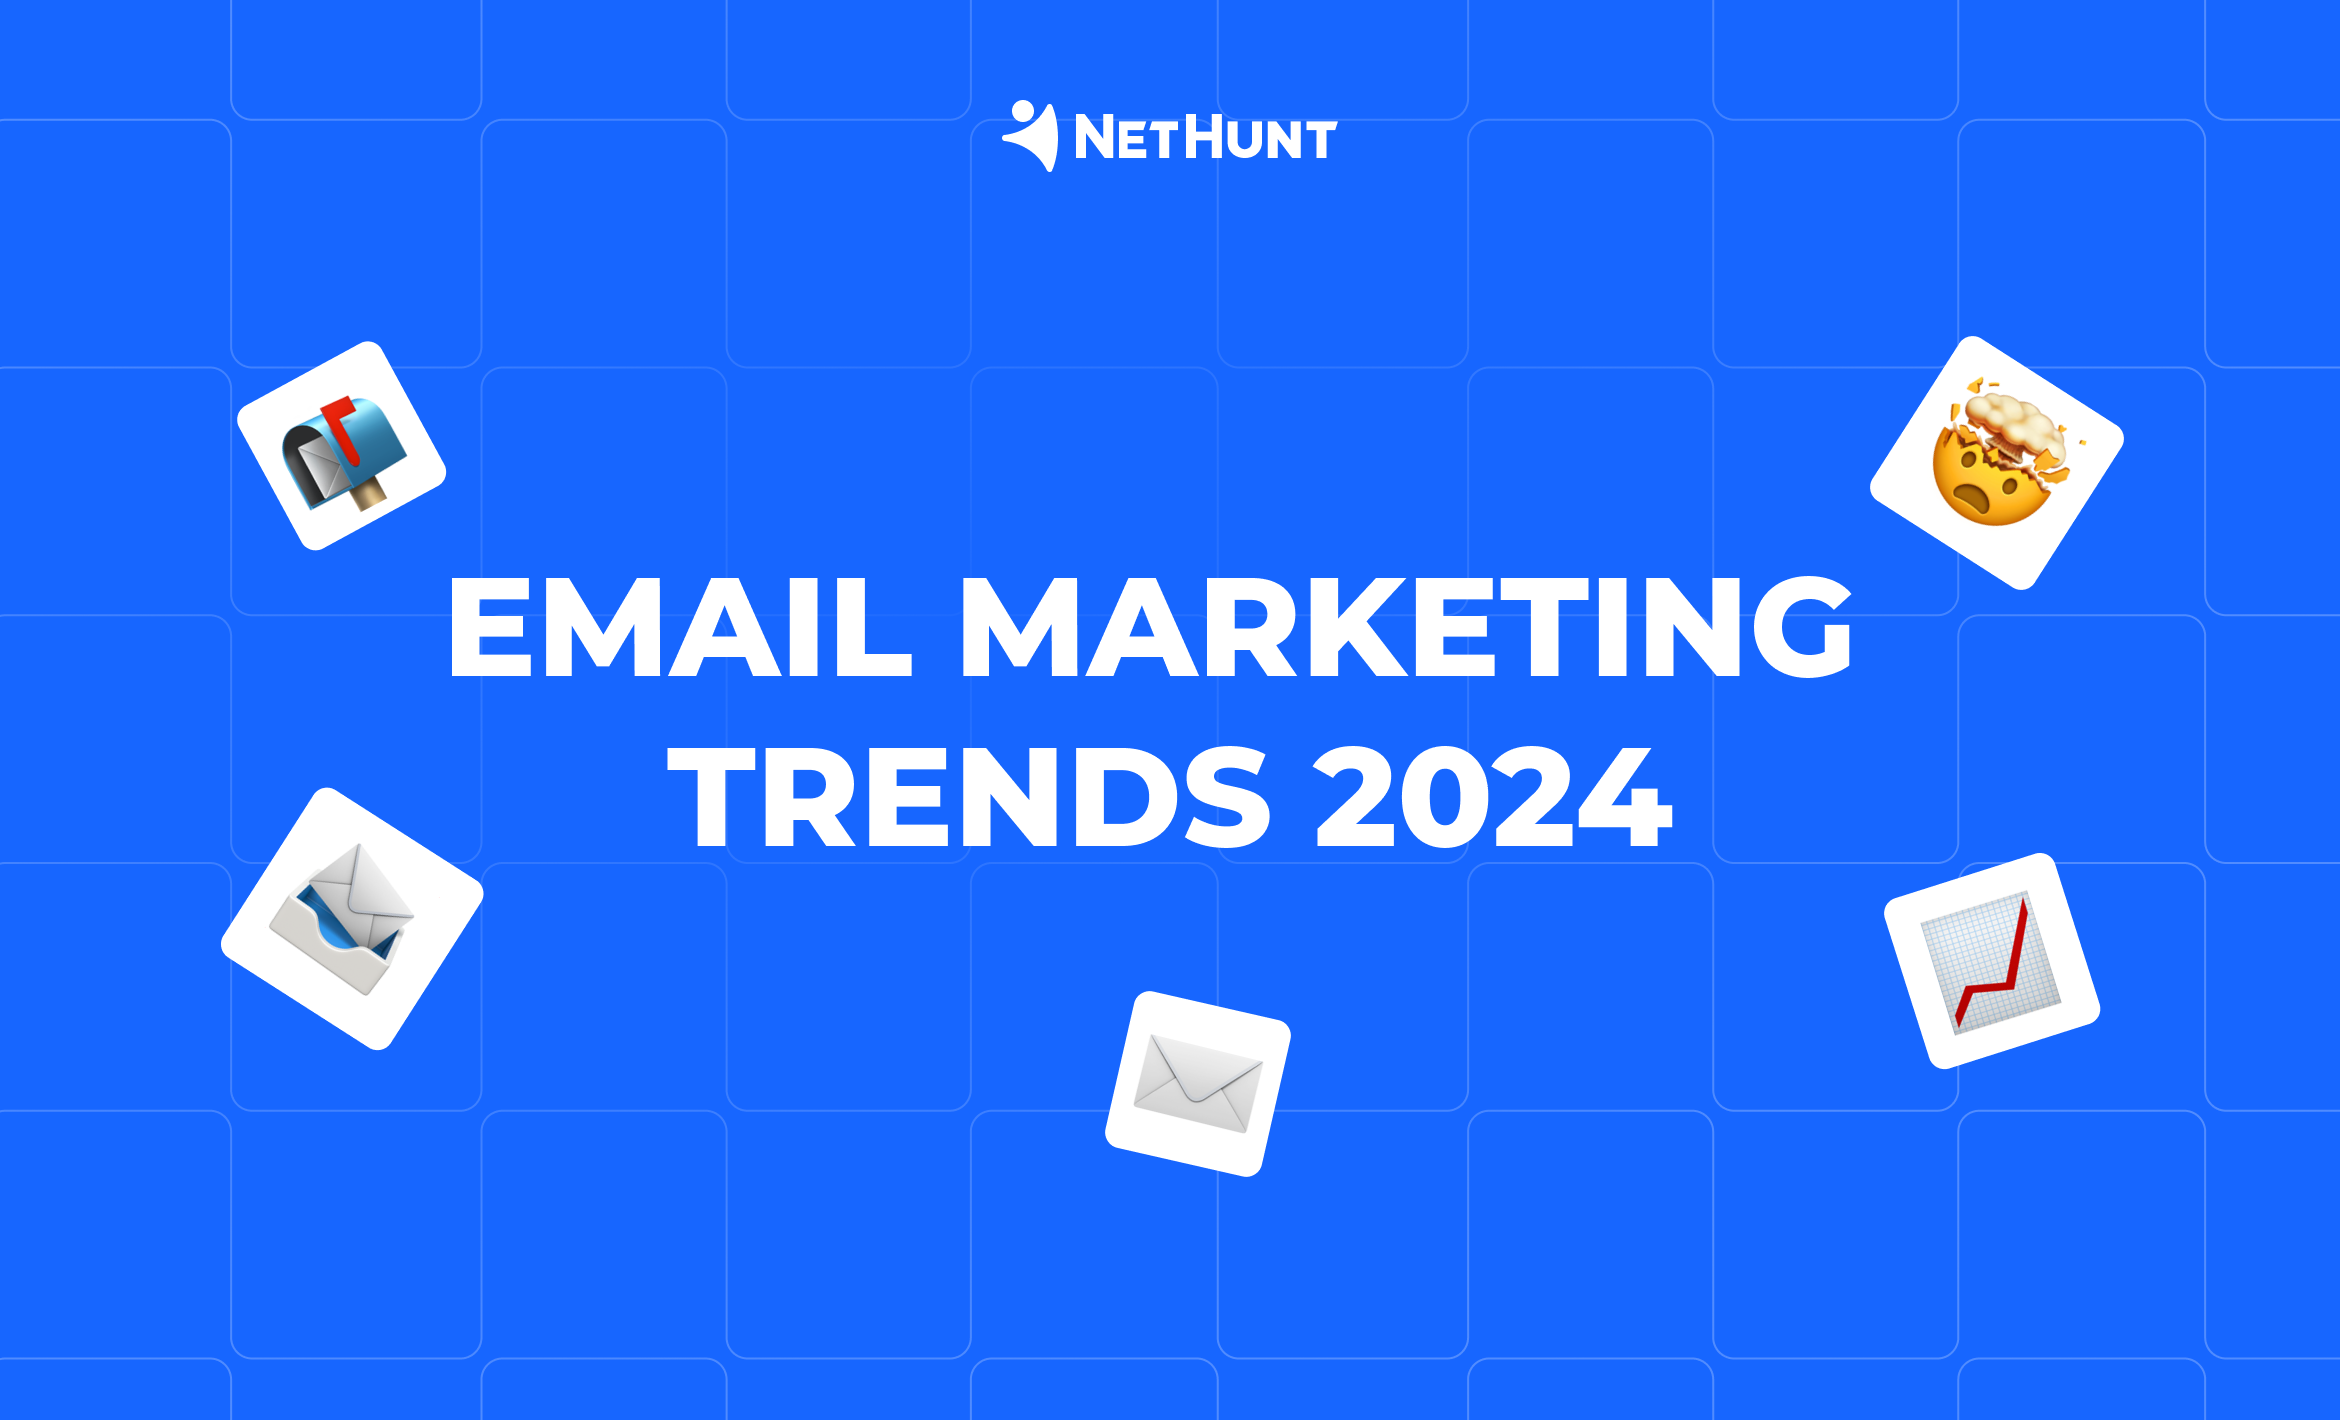 Hot or not? Email marketing trends in 2024